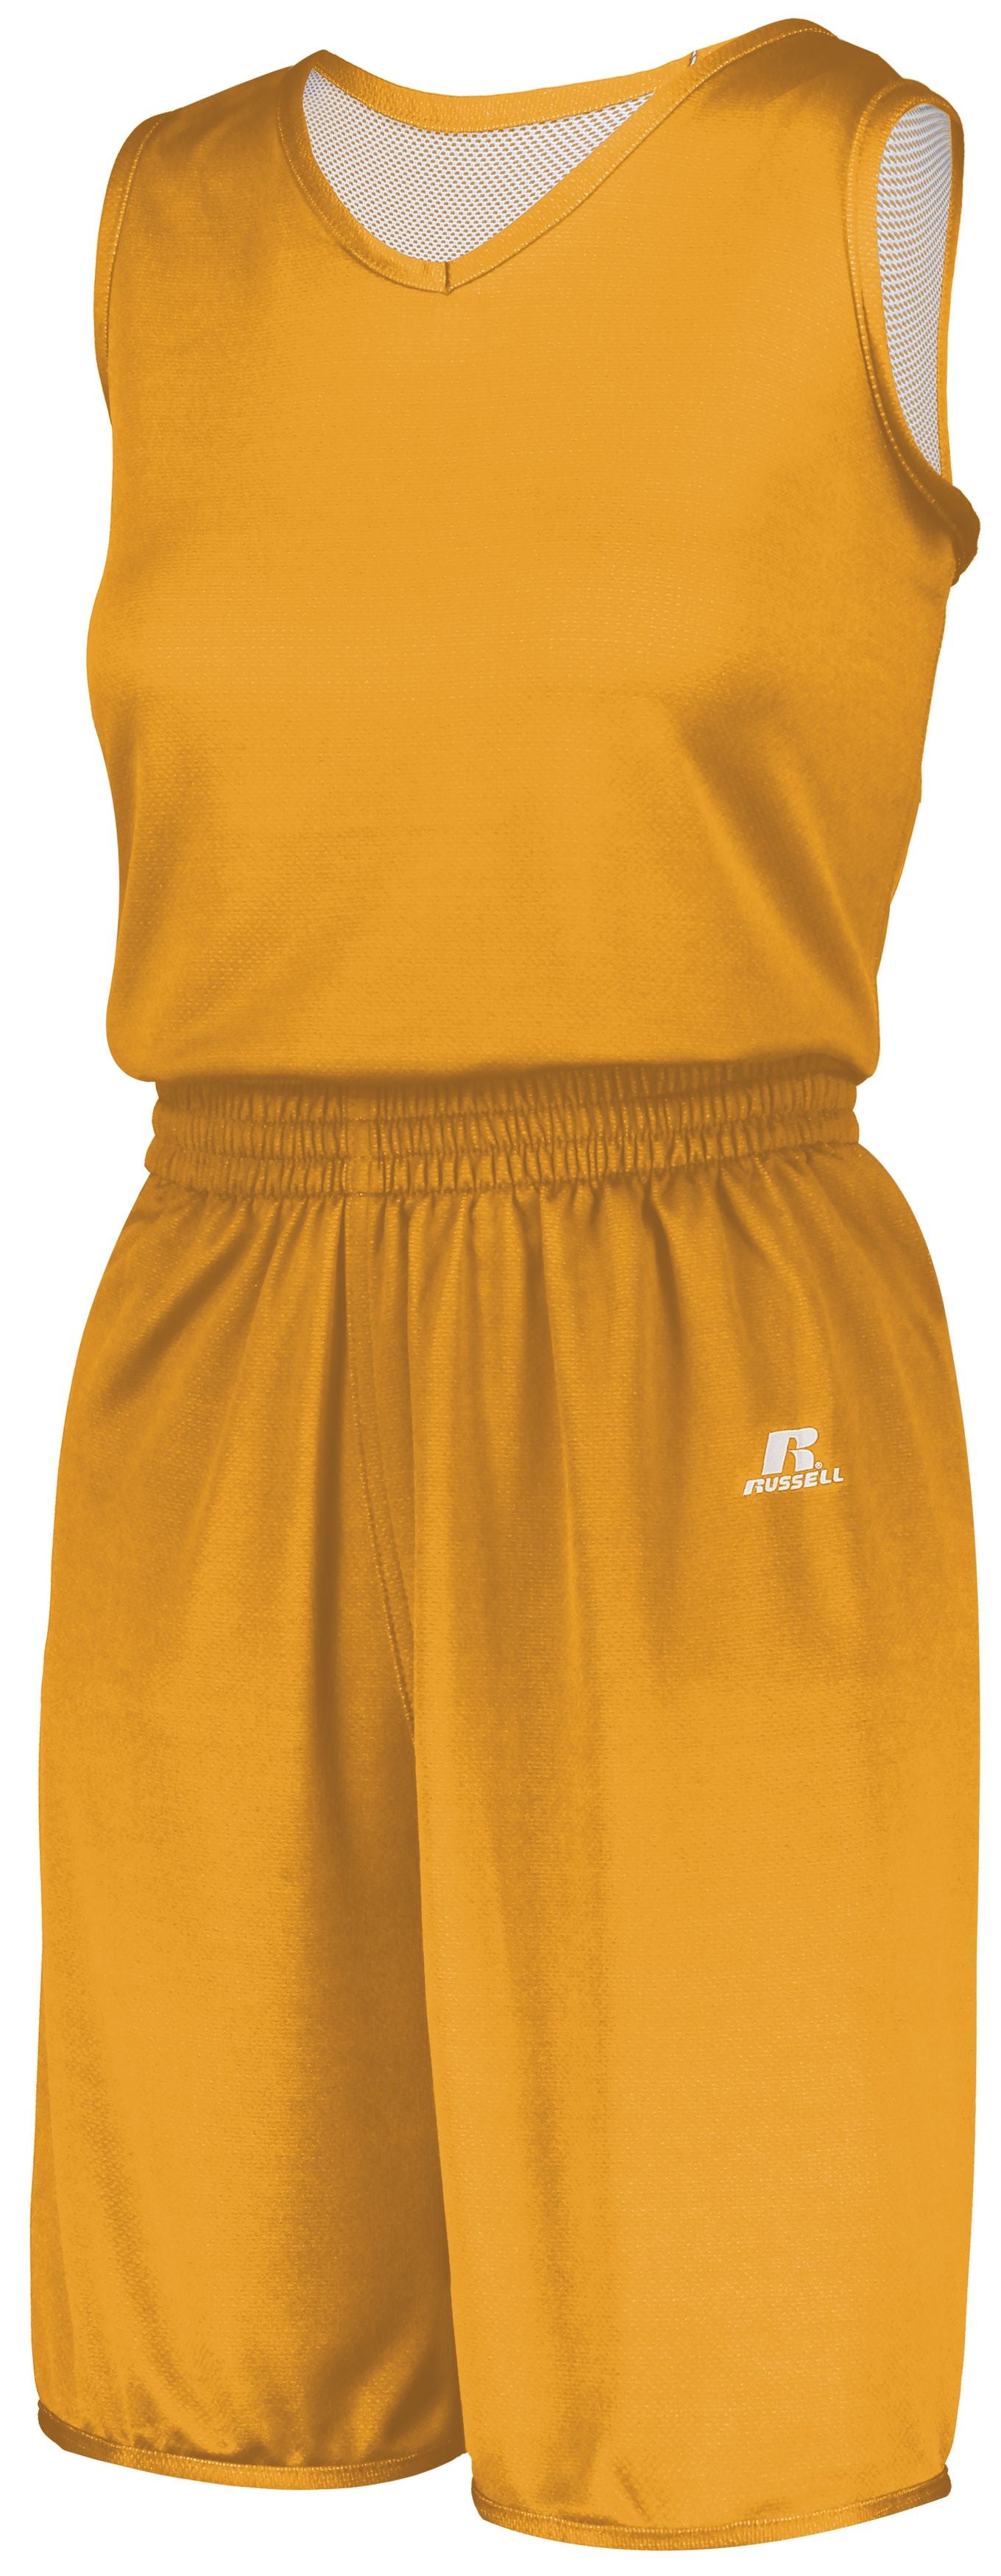 Russell Athletic Ladies Undivided Solid Single Ply Reversible Jersey